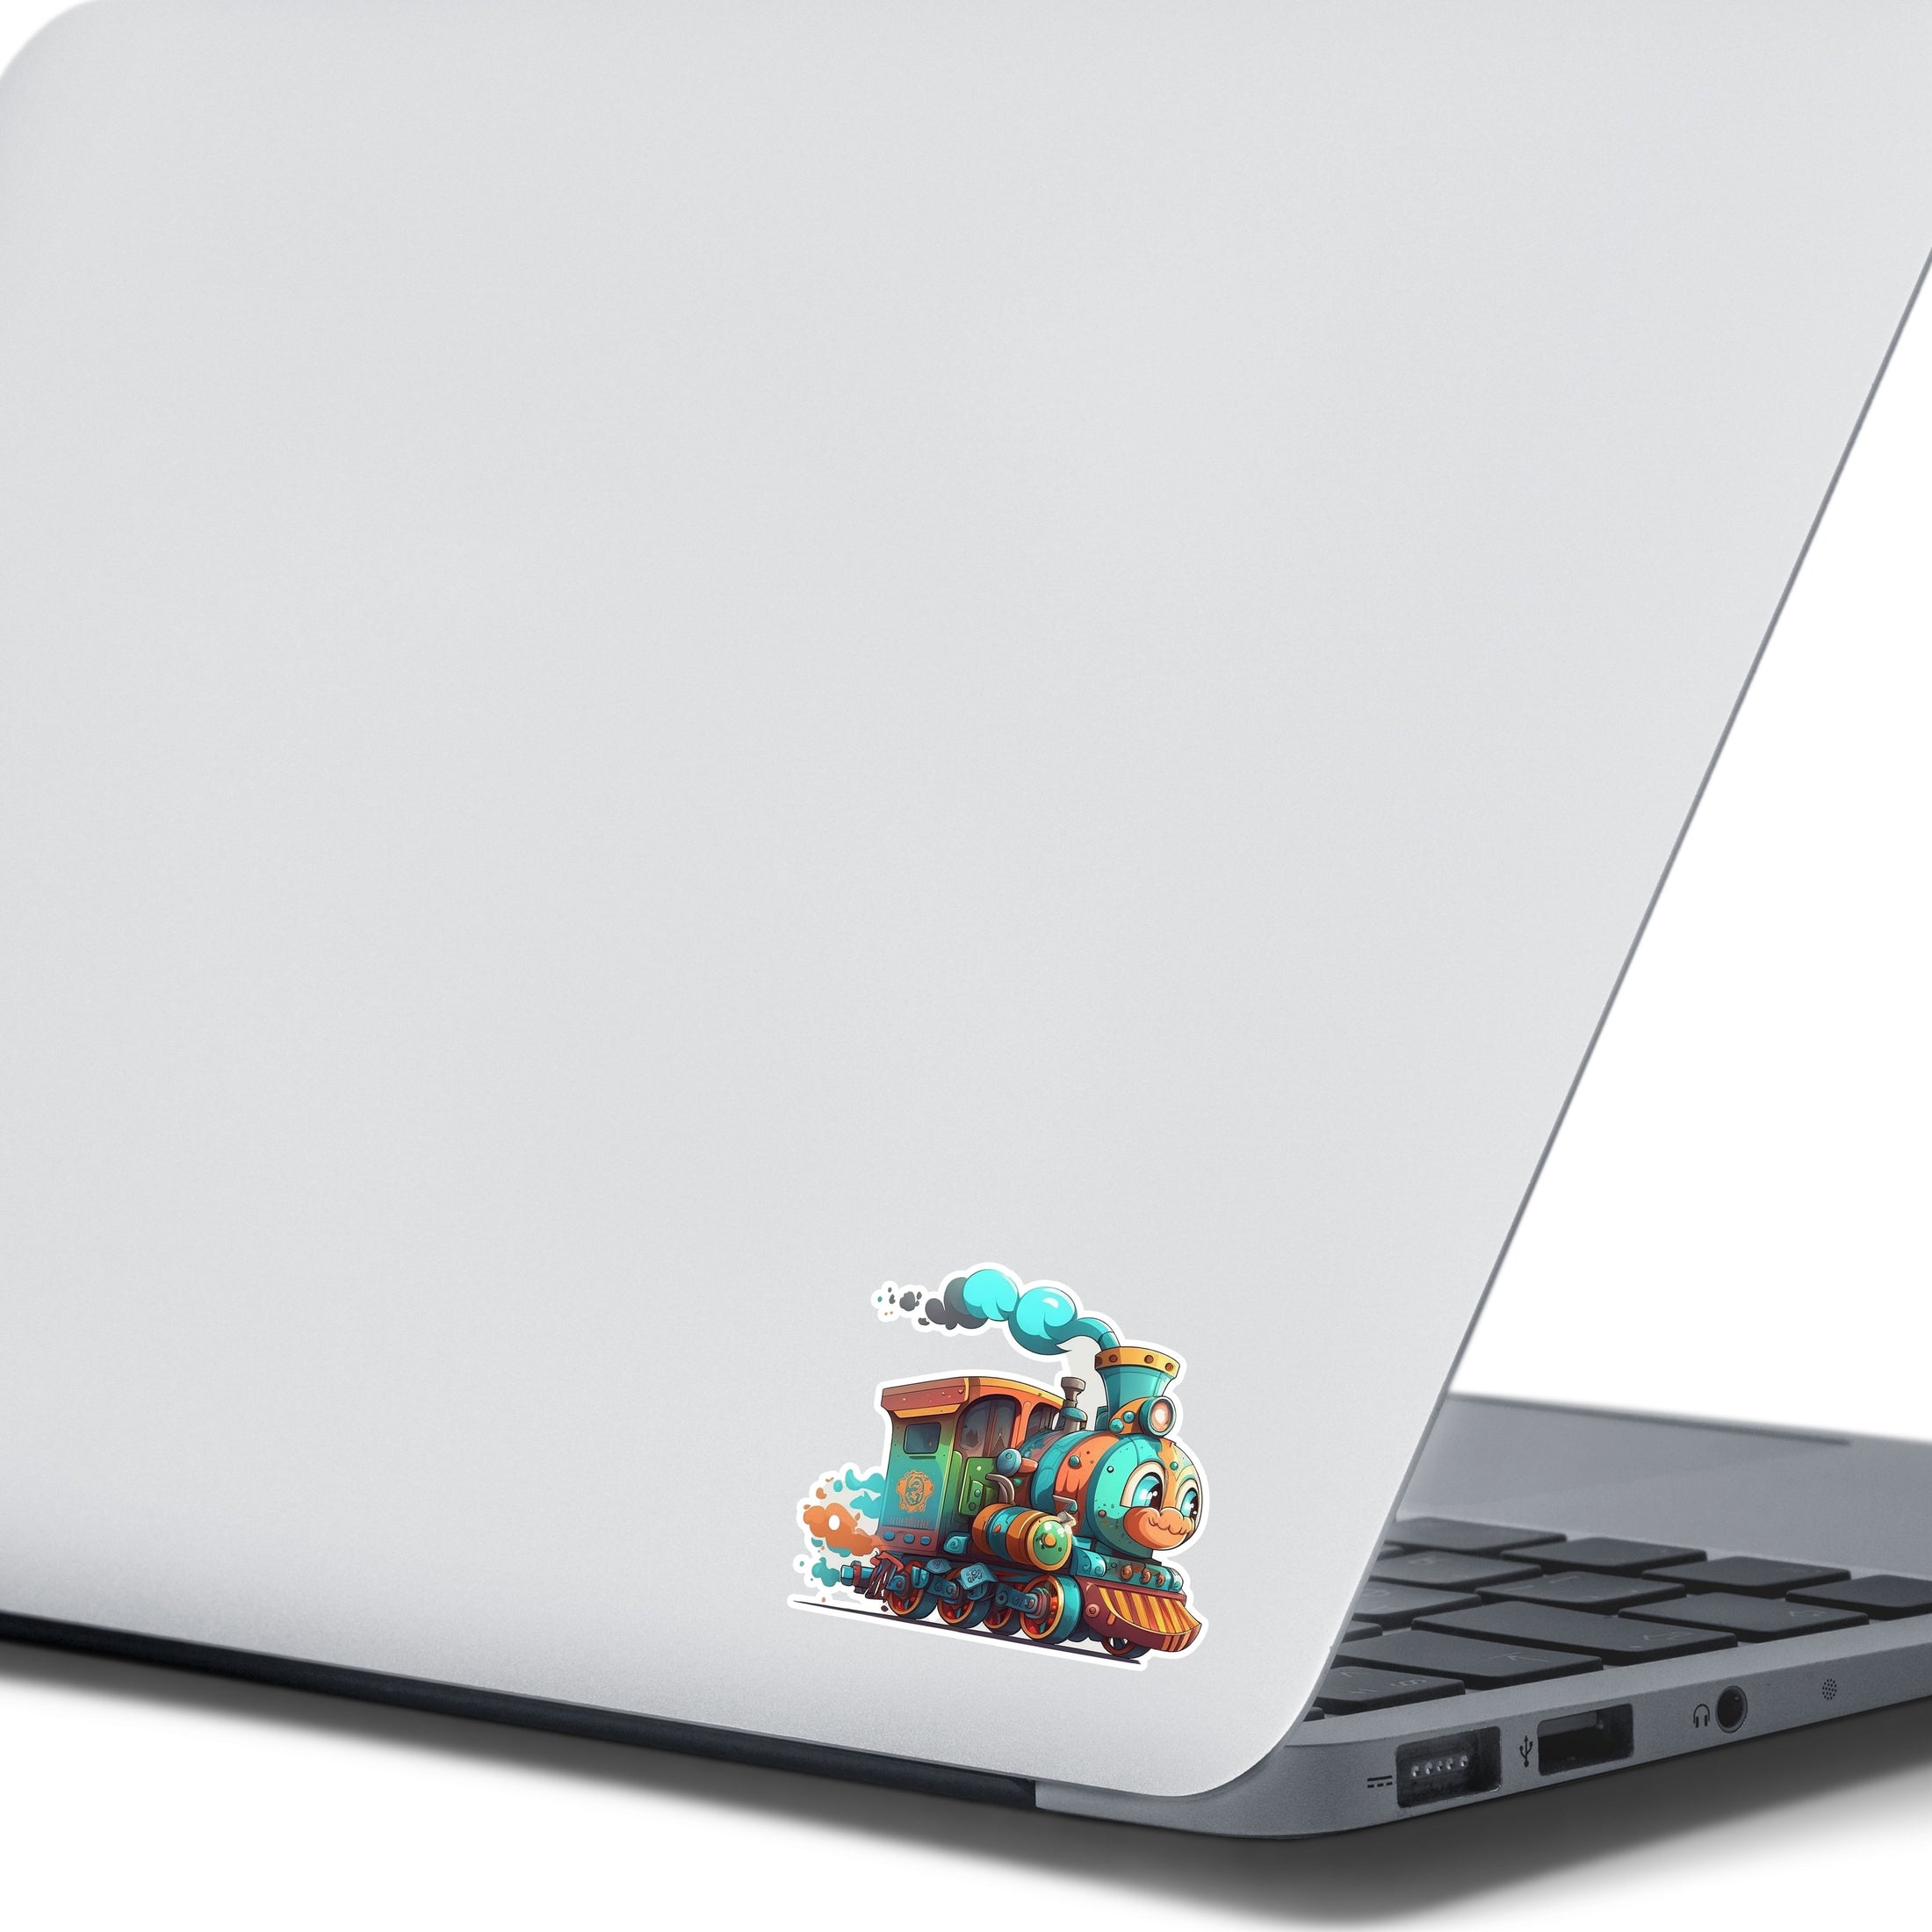 This image shows the toy train sticker on the back of an open laptop.